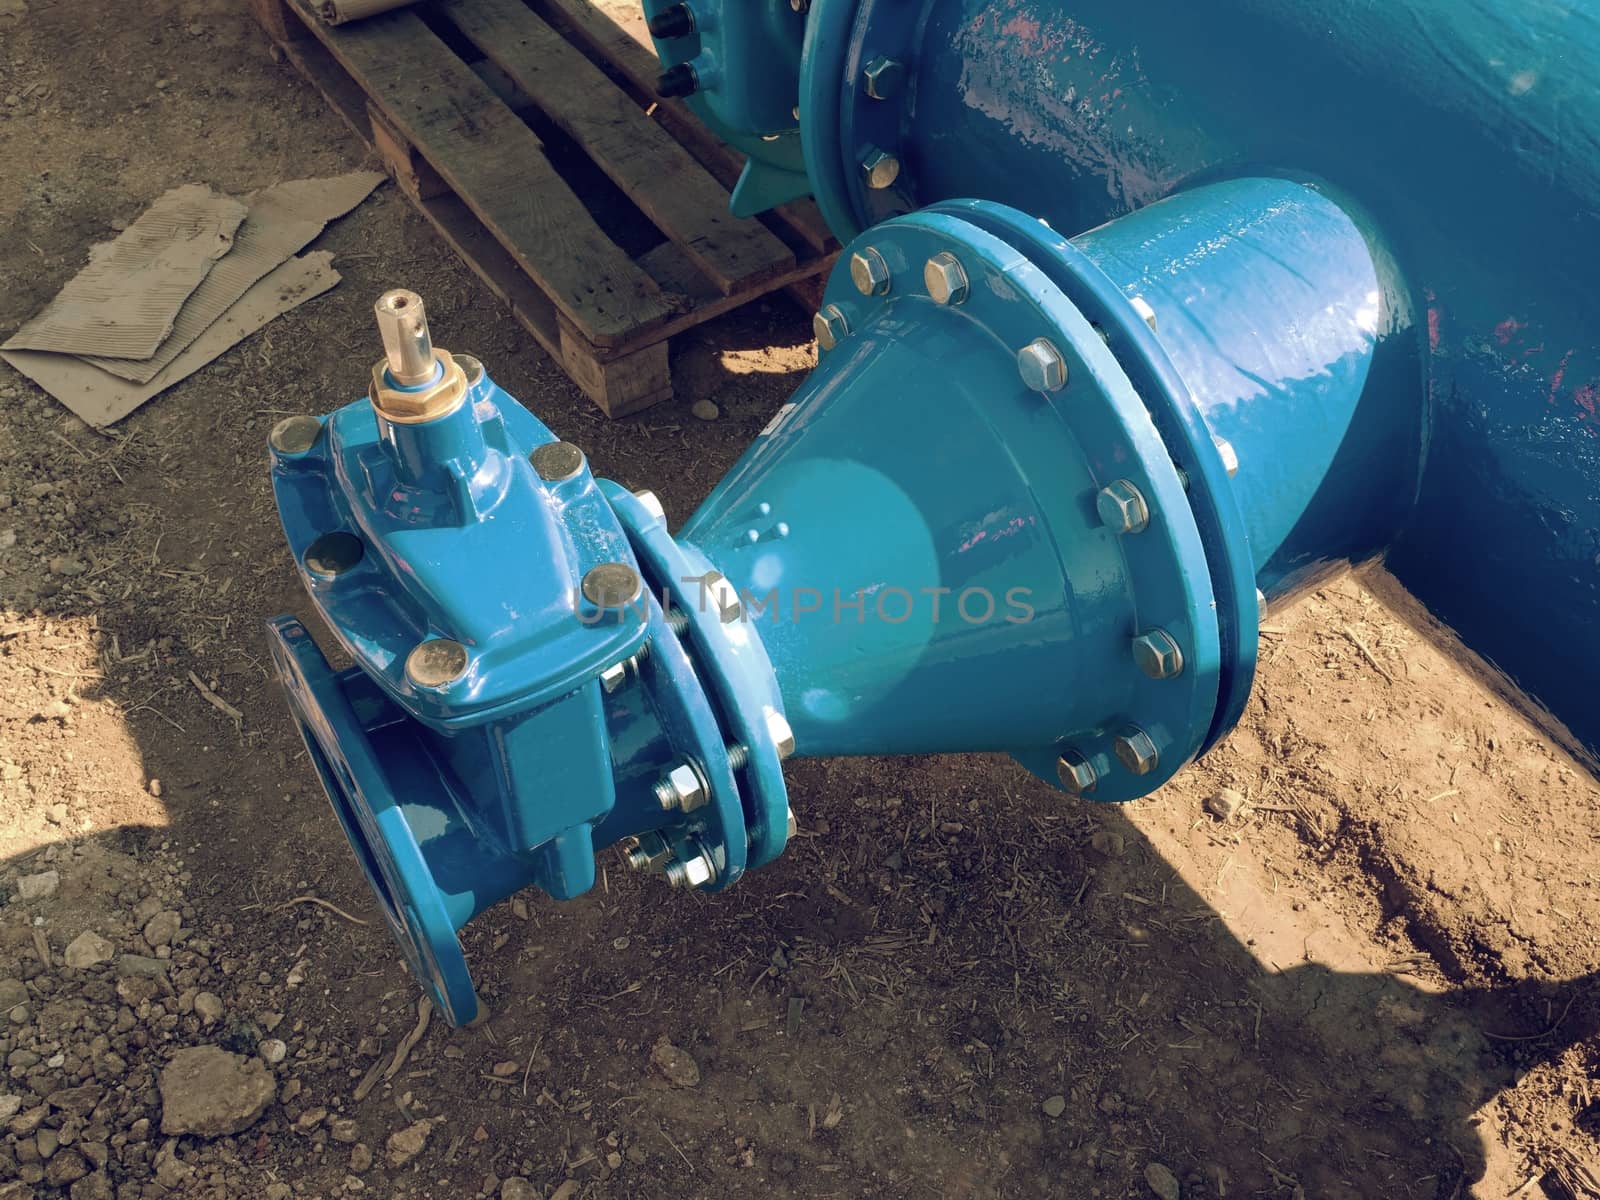 Dring water piping , Gate valves and reduction member. Pipe fittings joint with new screws and nuts. Repairing process to connect drink water supply.